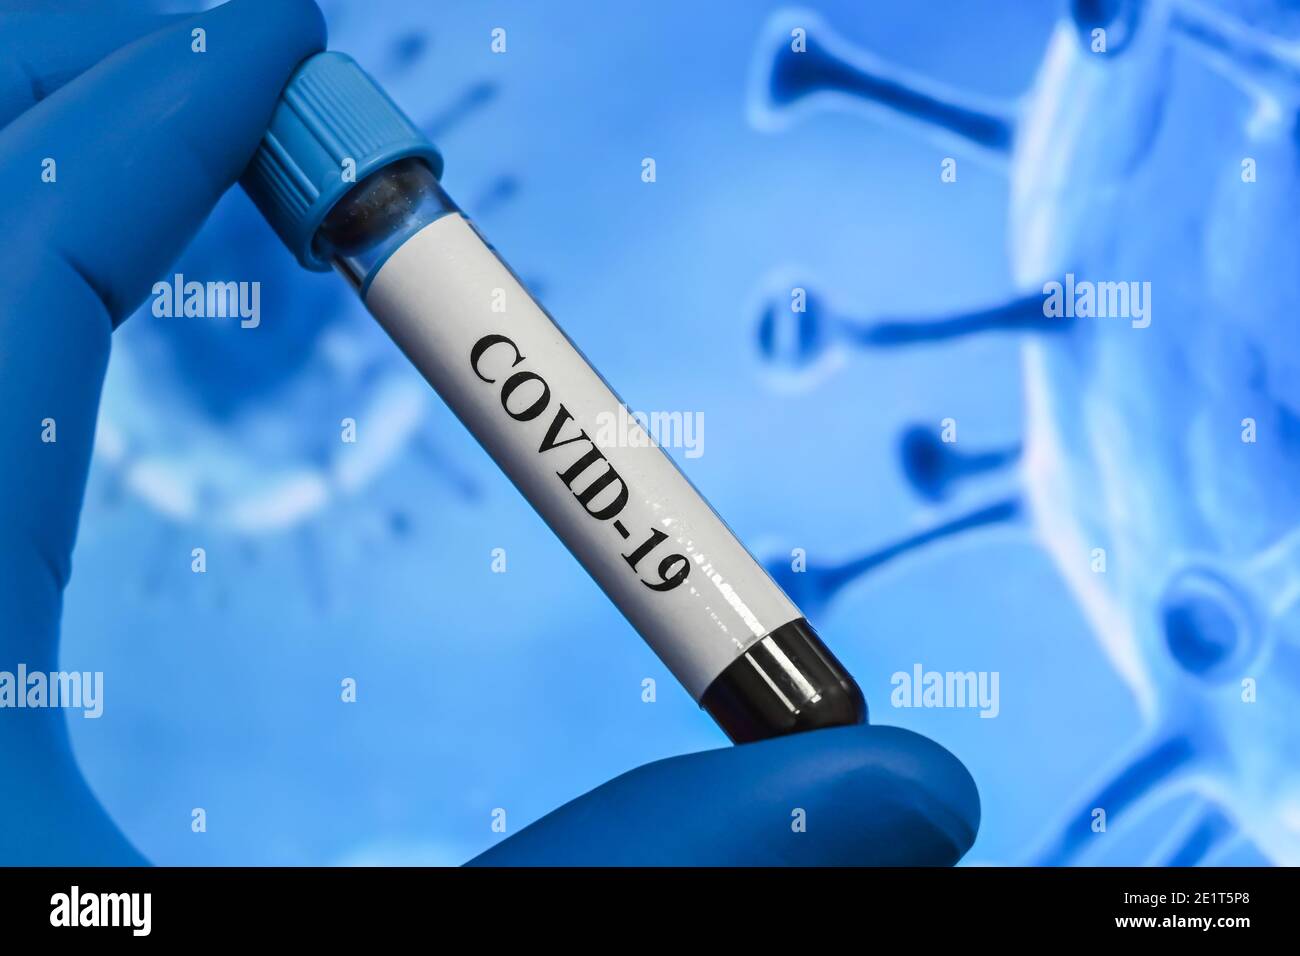 Coronavirus test. Detection of antibodies for COVID-19 in a blood sample. Stock Photo